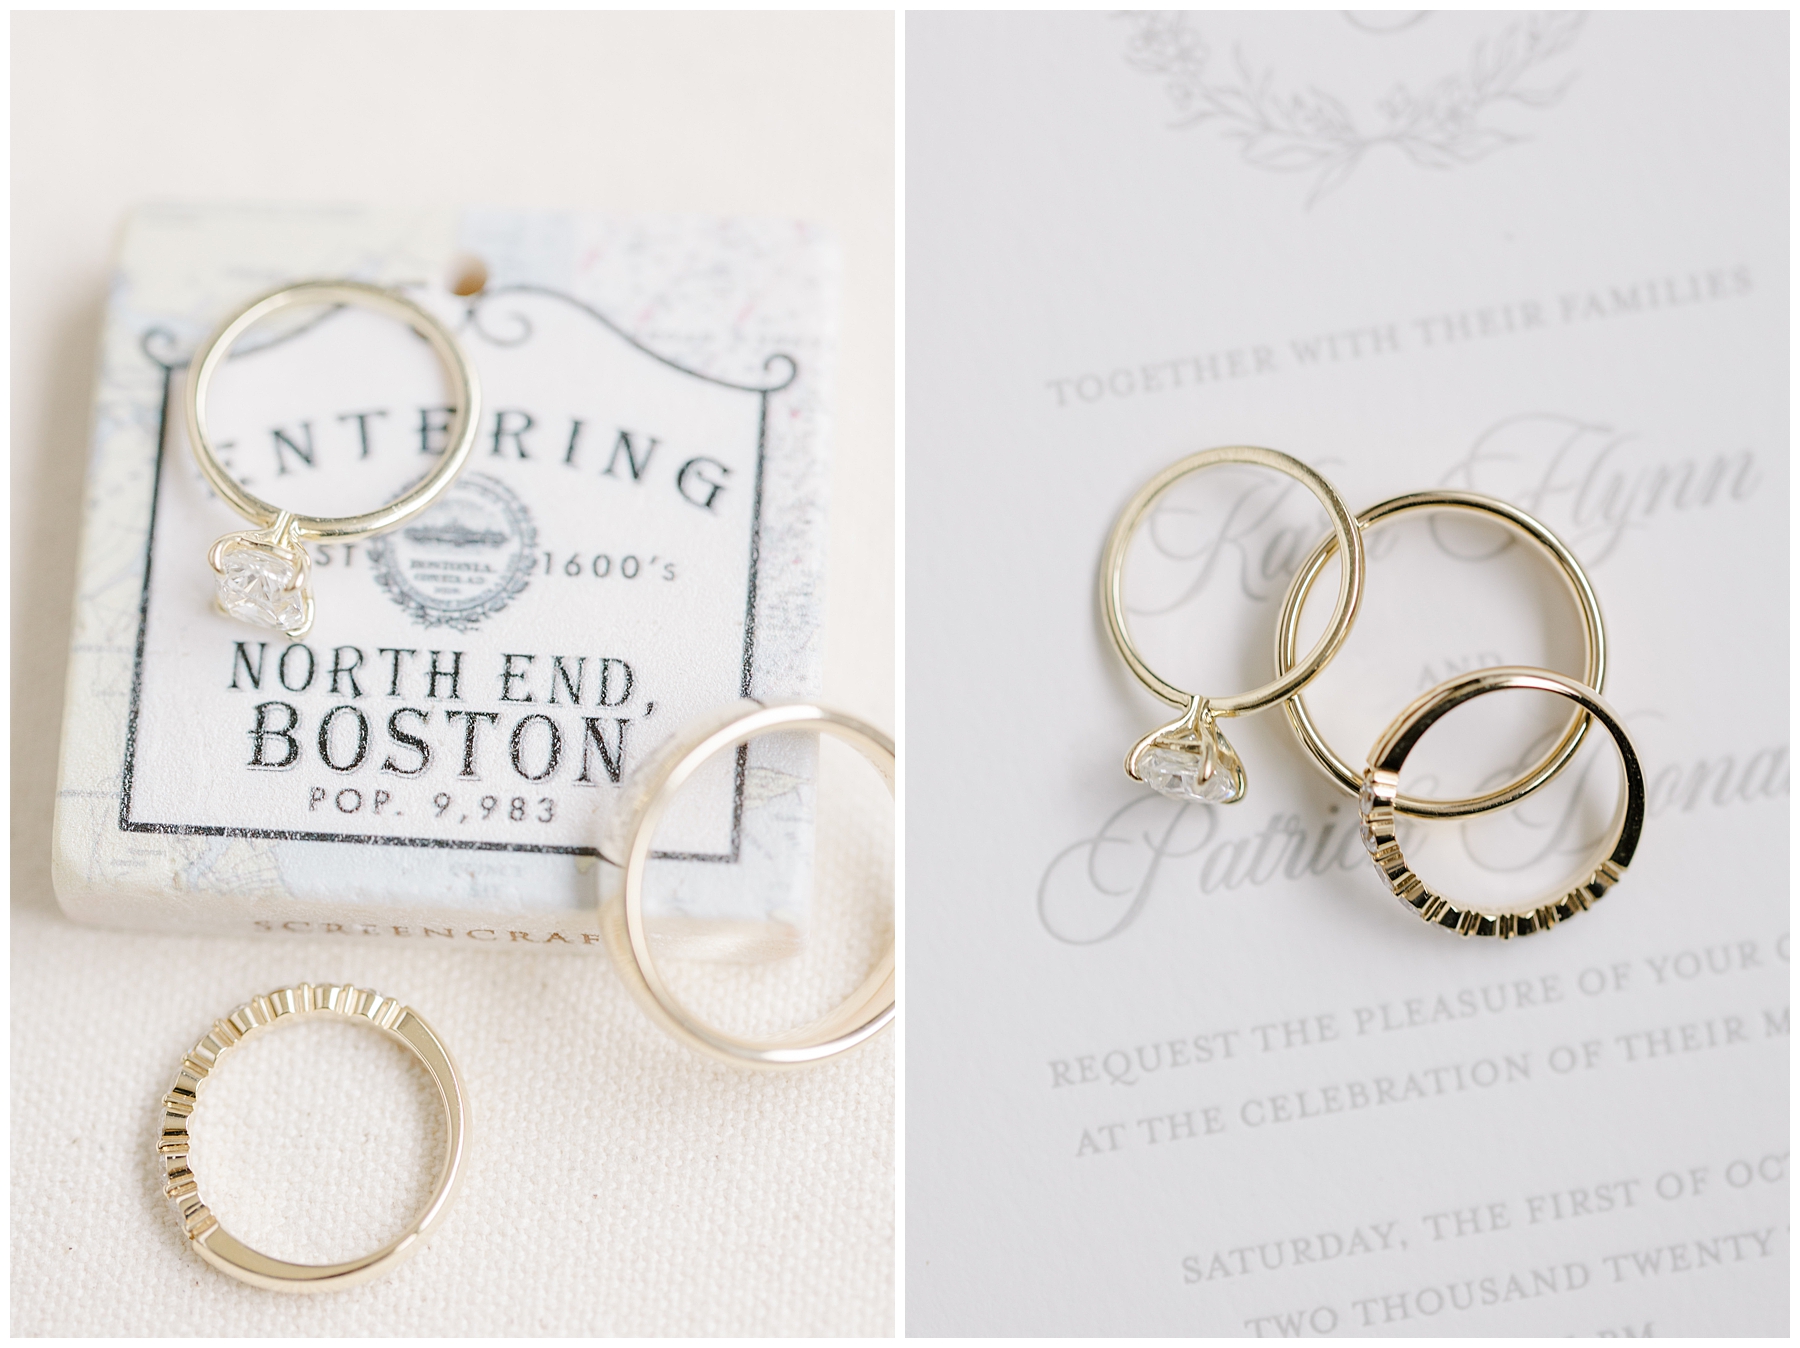 wedding rings and details from Boston wedding 